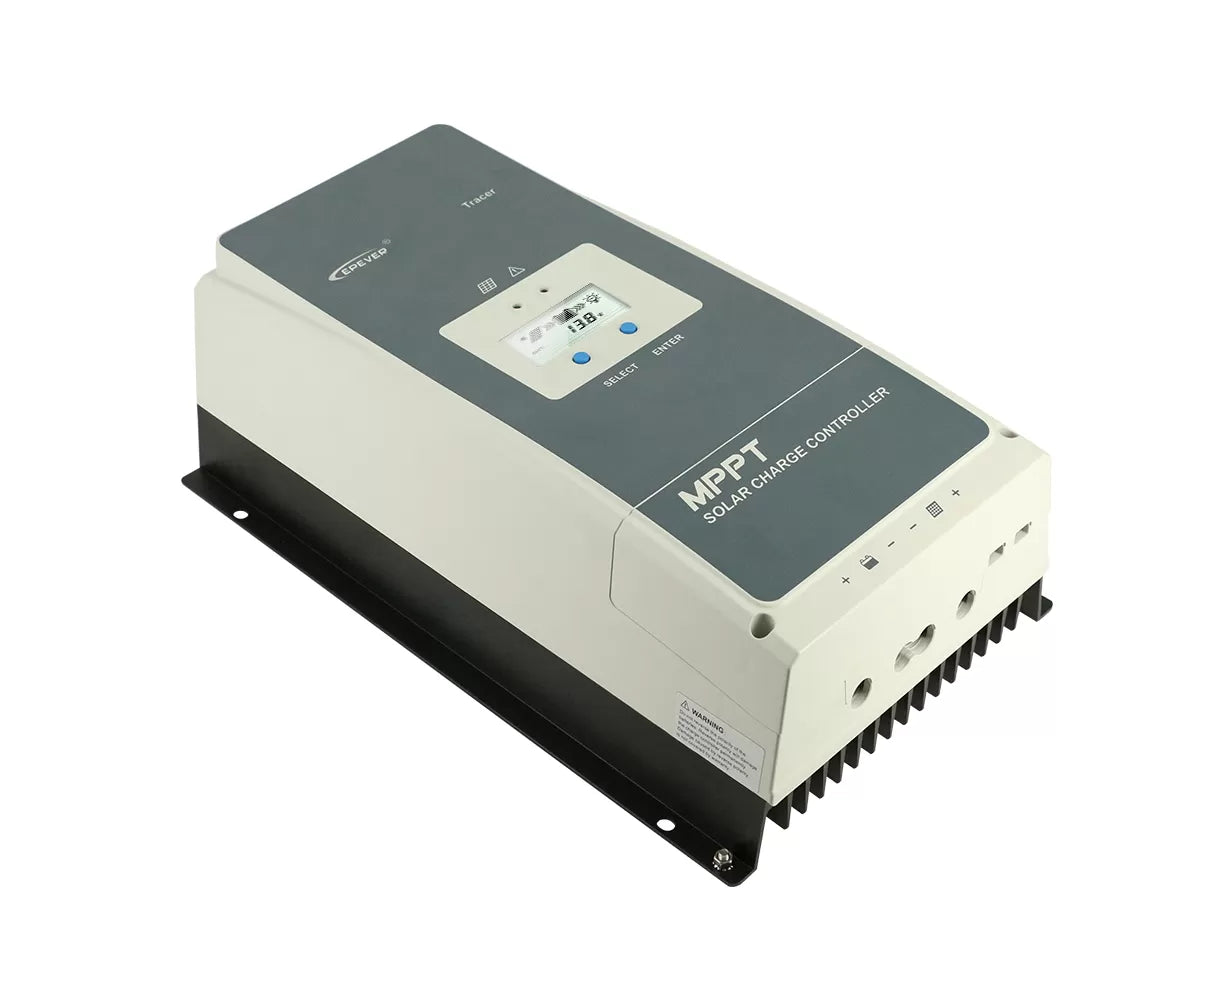 Tracer5415AN - EPever 50A MPPT Solar Charge Controller